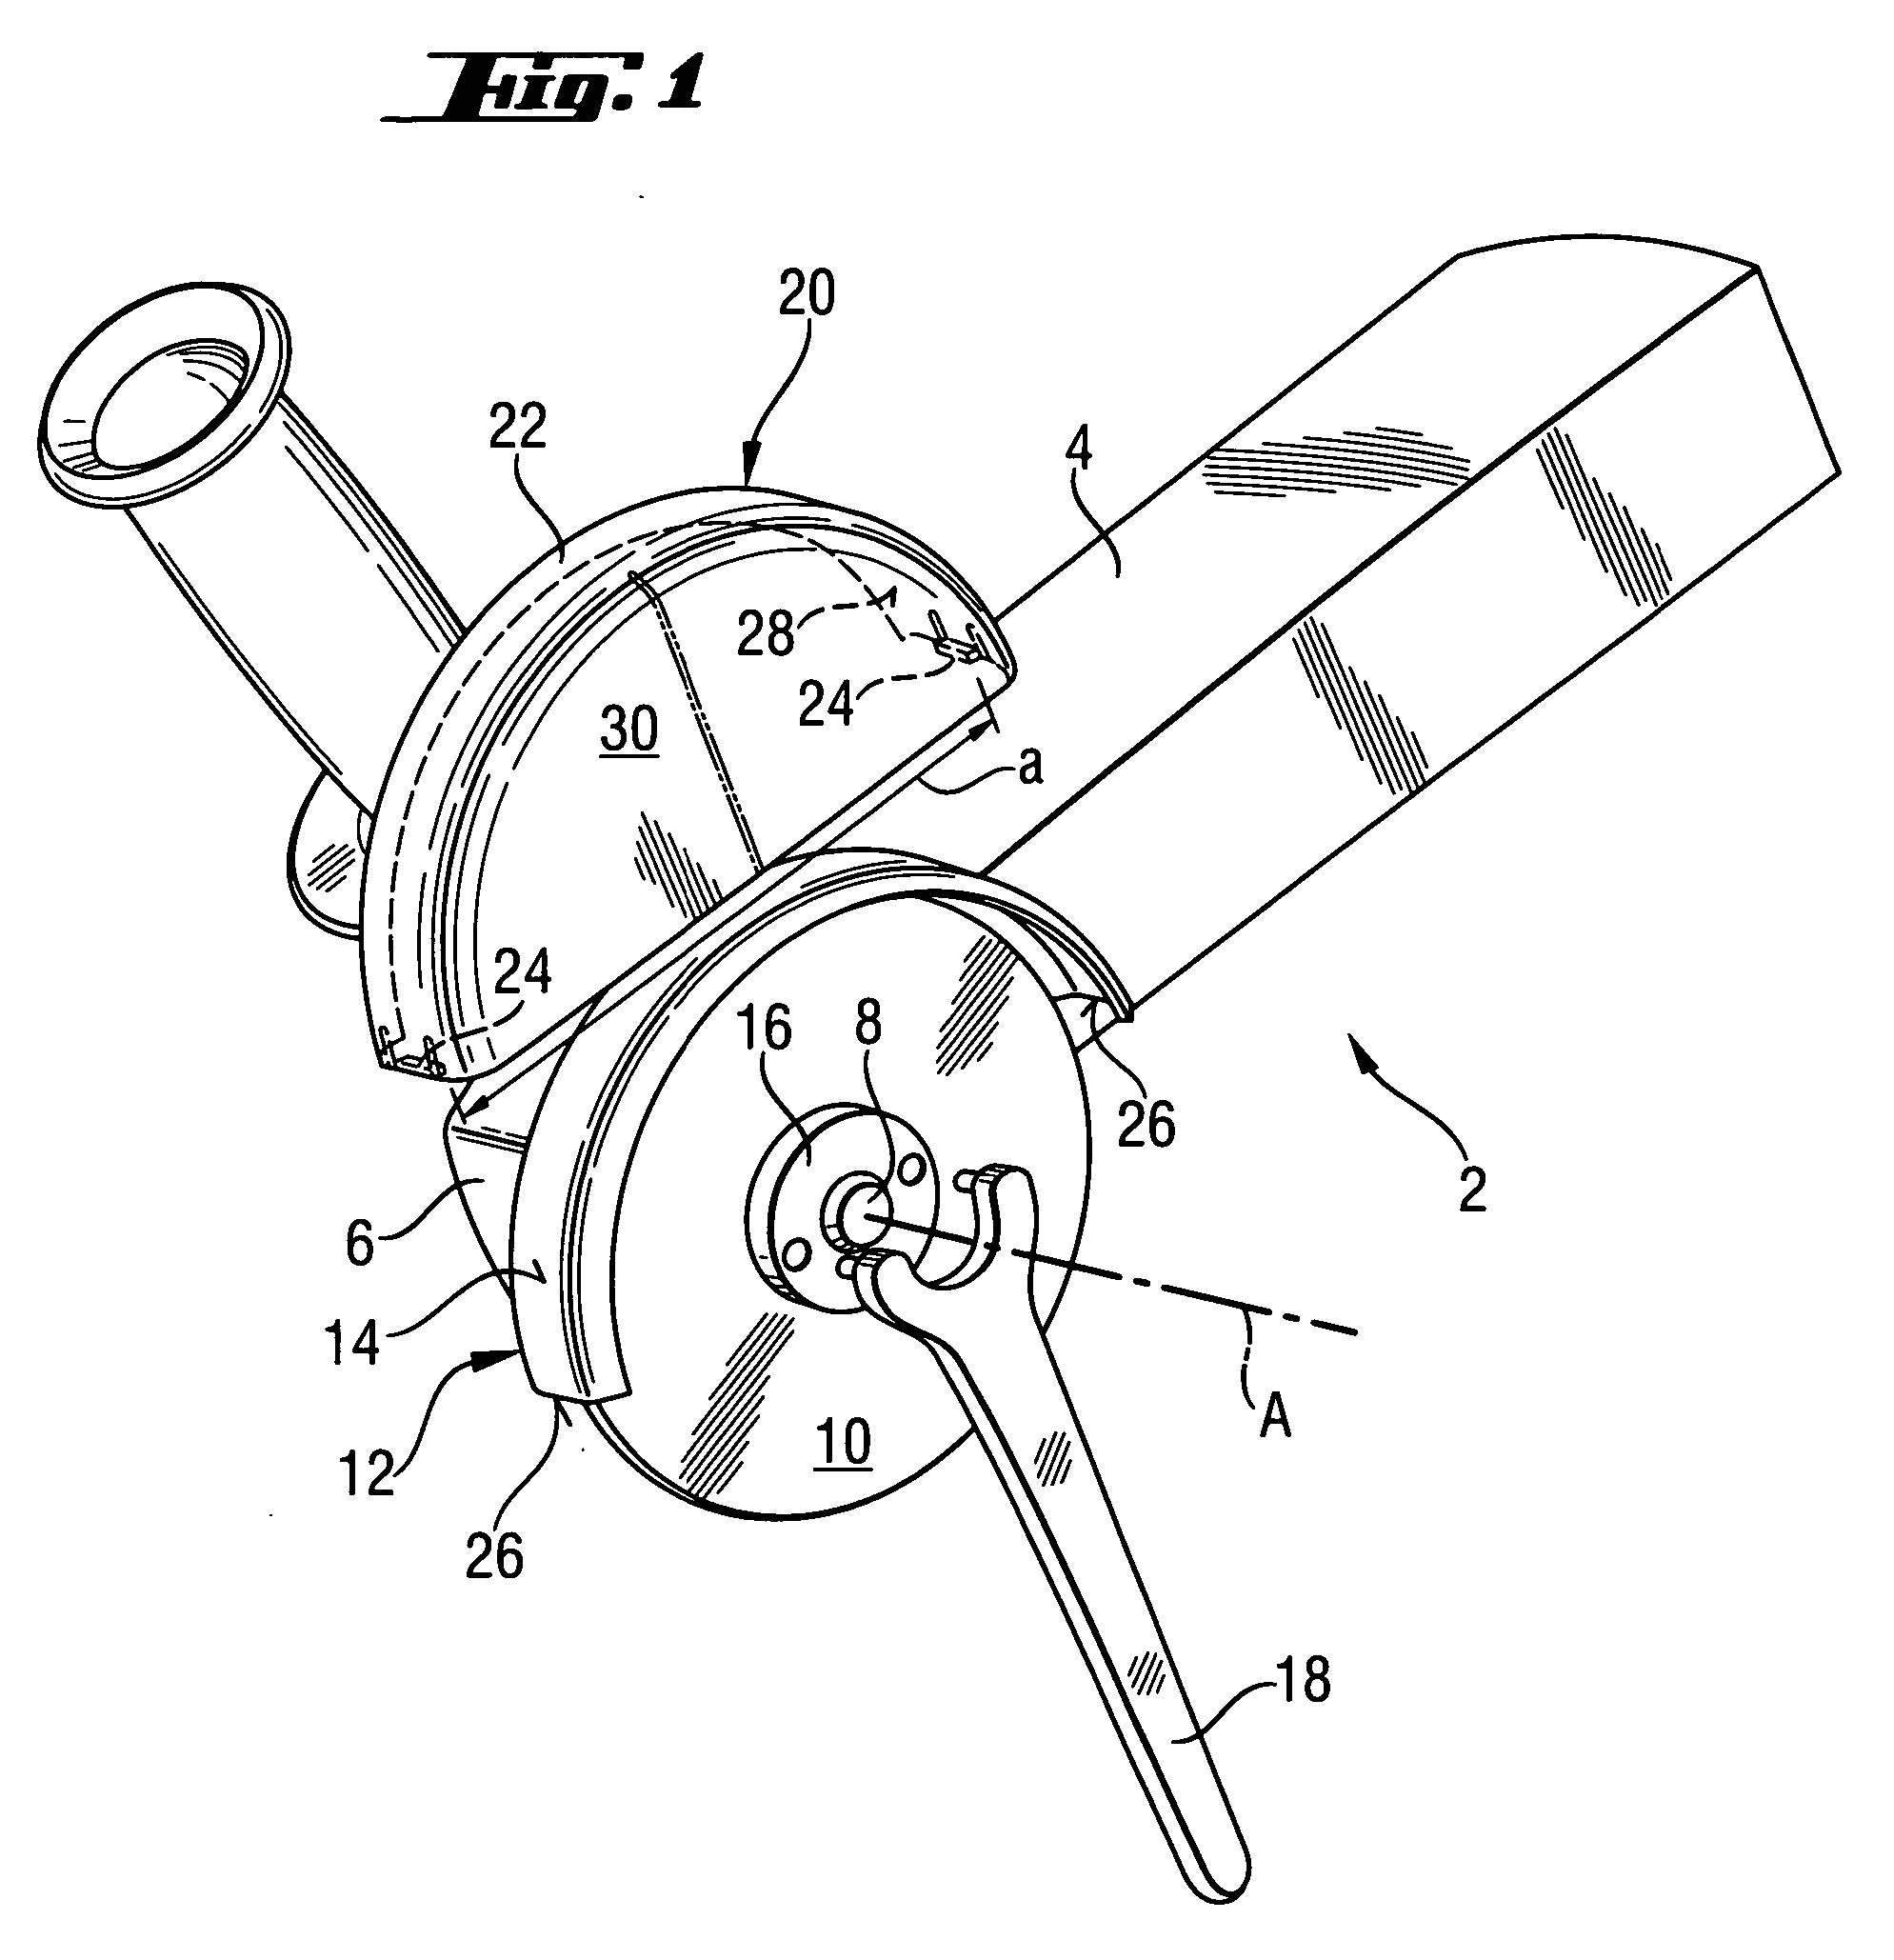 Cover device for a power tool